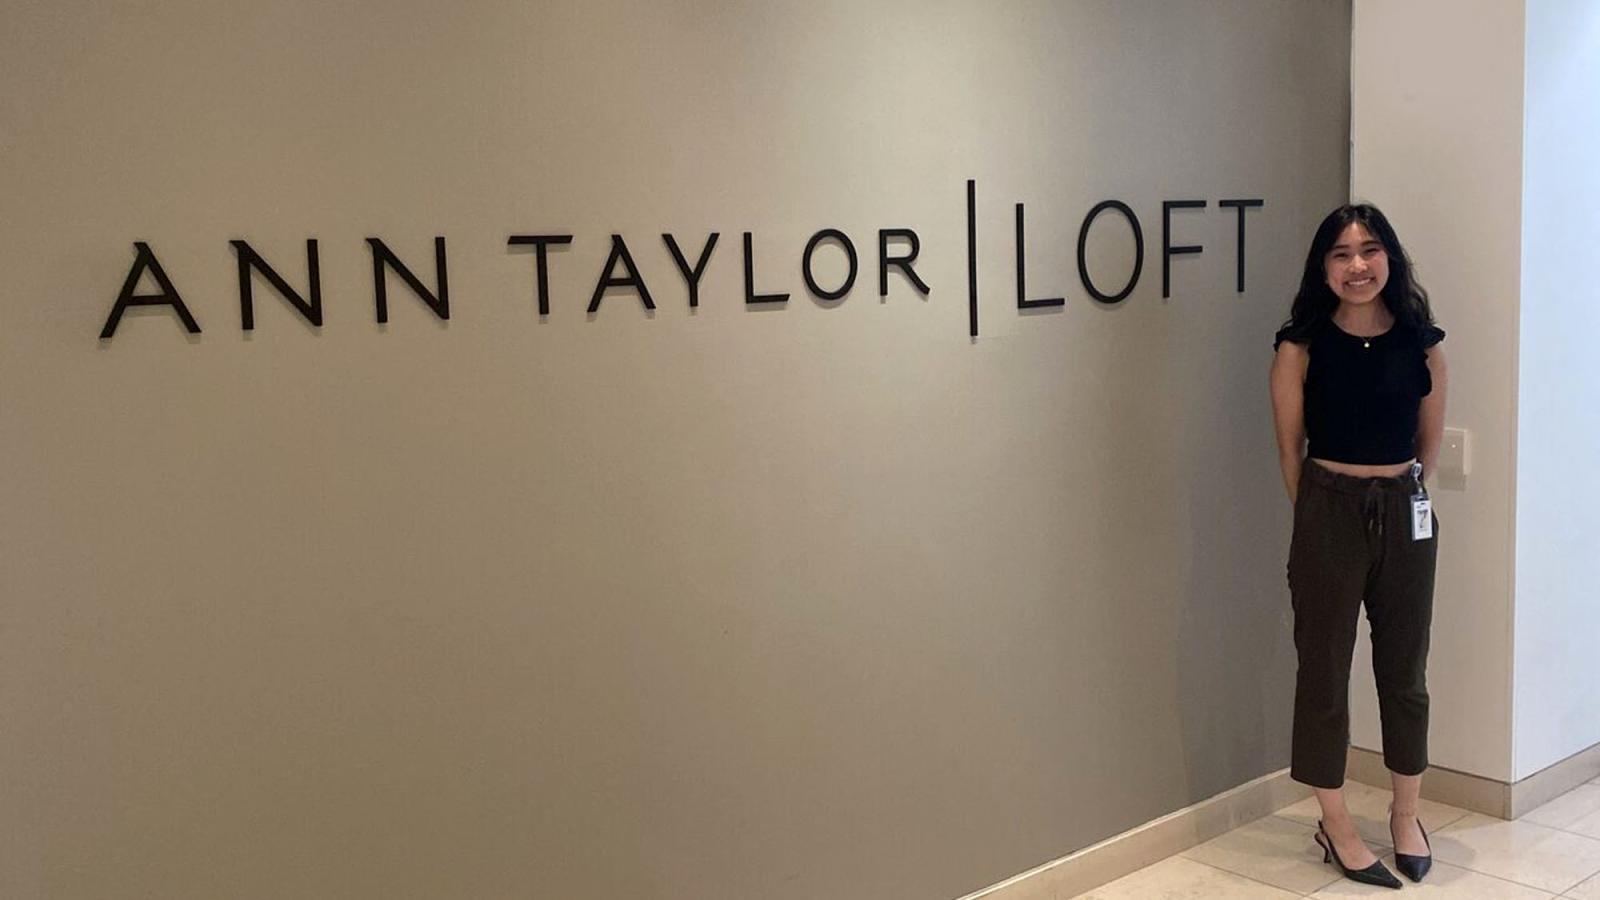 Lubin student Emi Matsumae '25 at her internship office standing in front of the corporate signage for Ann Taylor LOFT